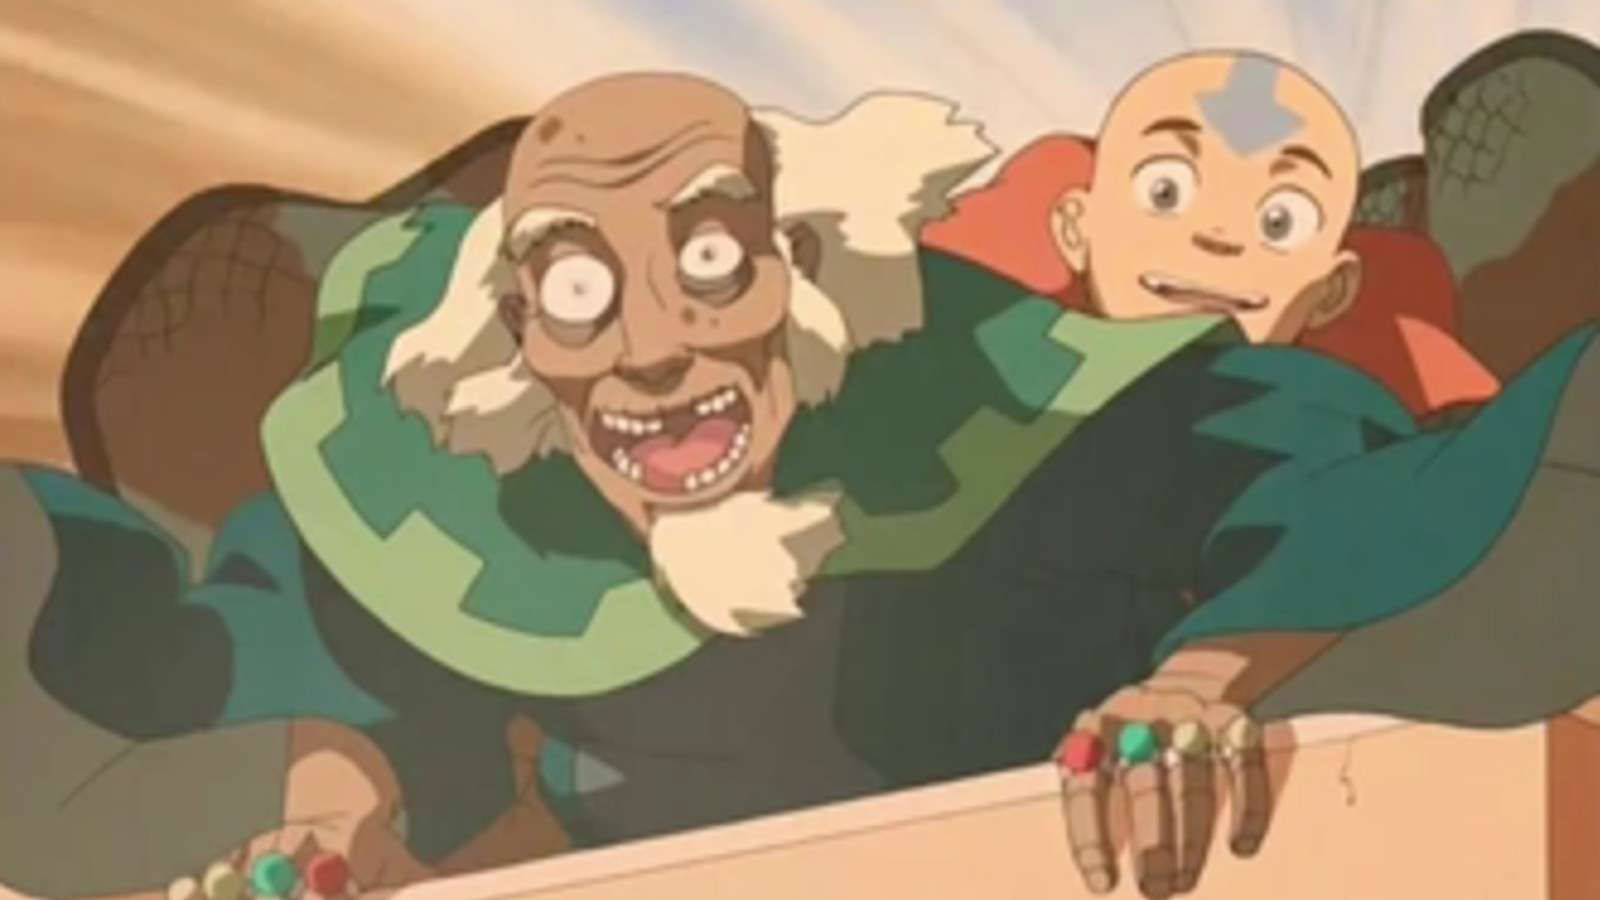 Bumi and Aang in Avatar: The Last Airbender